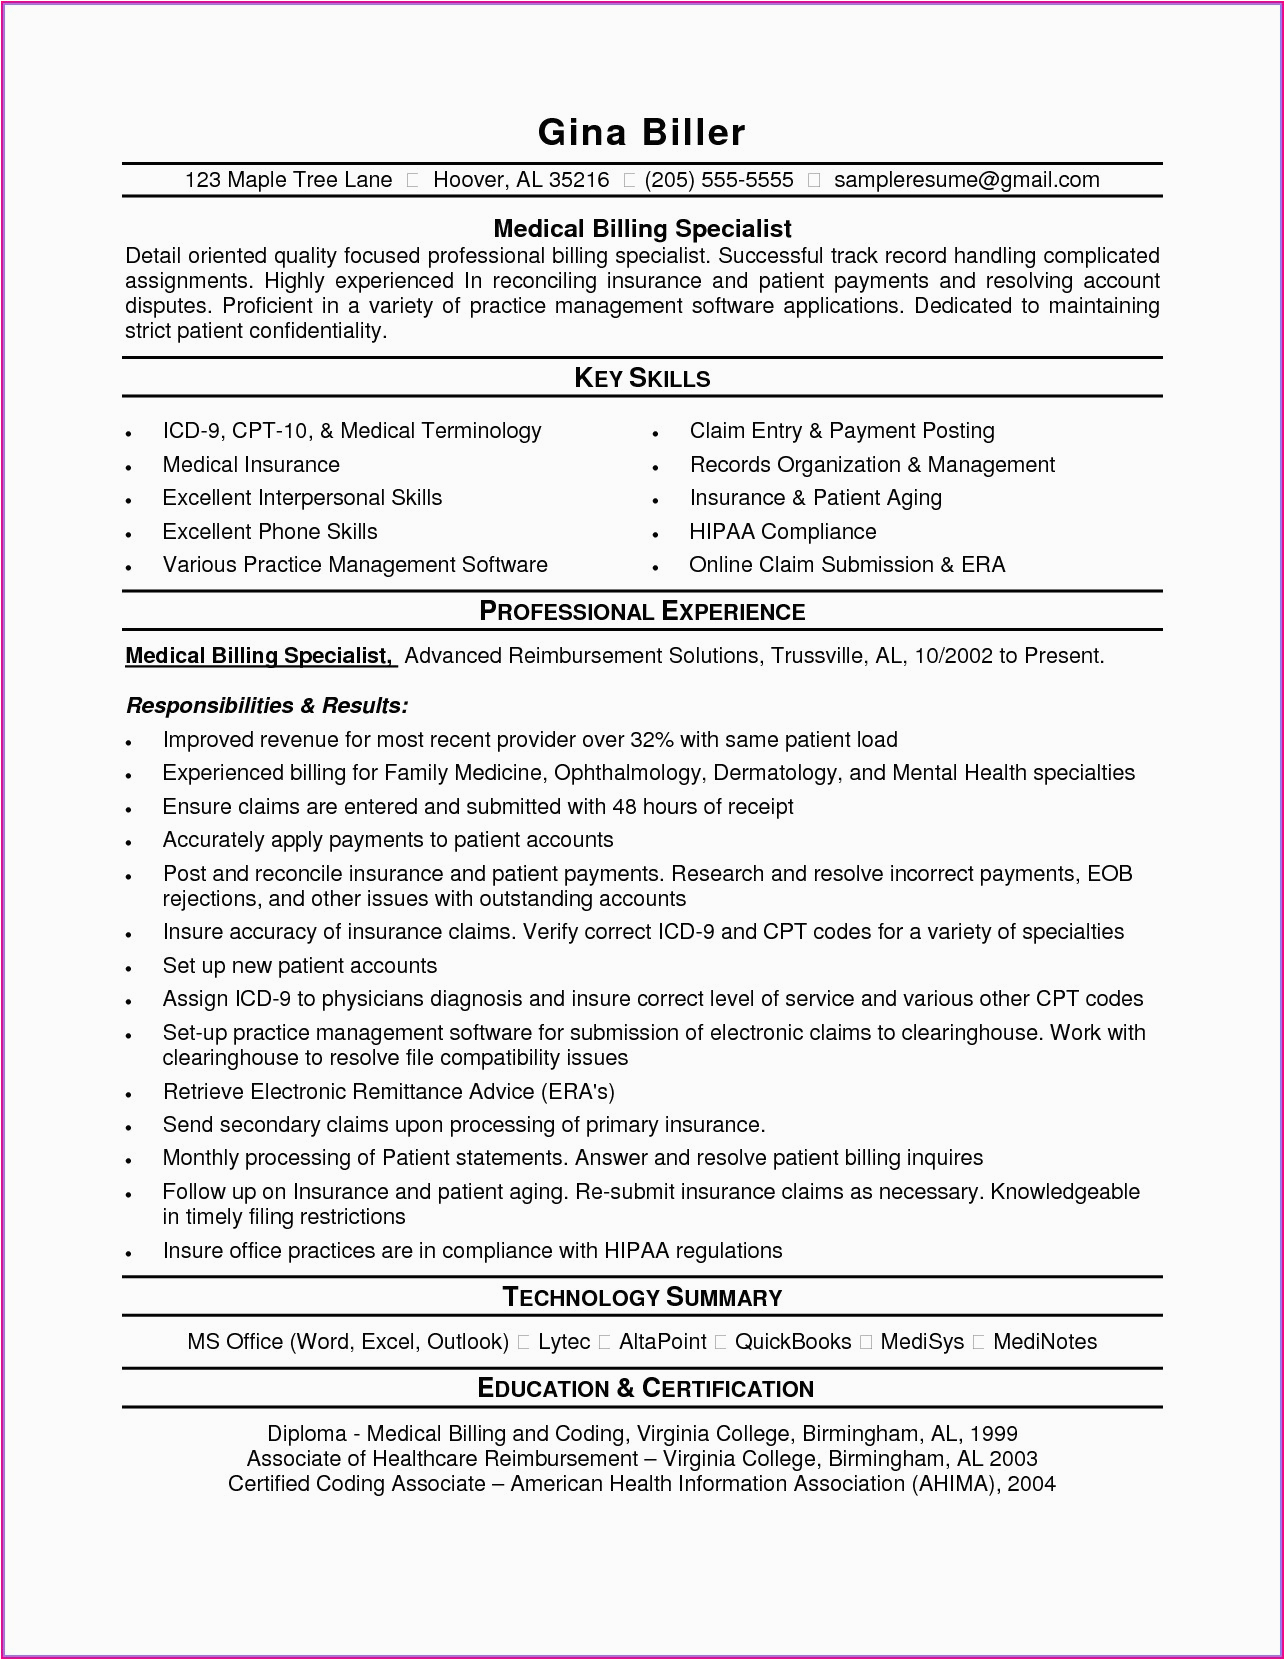 Functional Medical Coding and Billing Specialist Resume Sample Entry Level Medical Billing and Coding Resume Sample Resume Resume